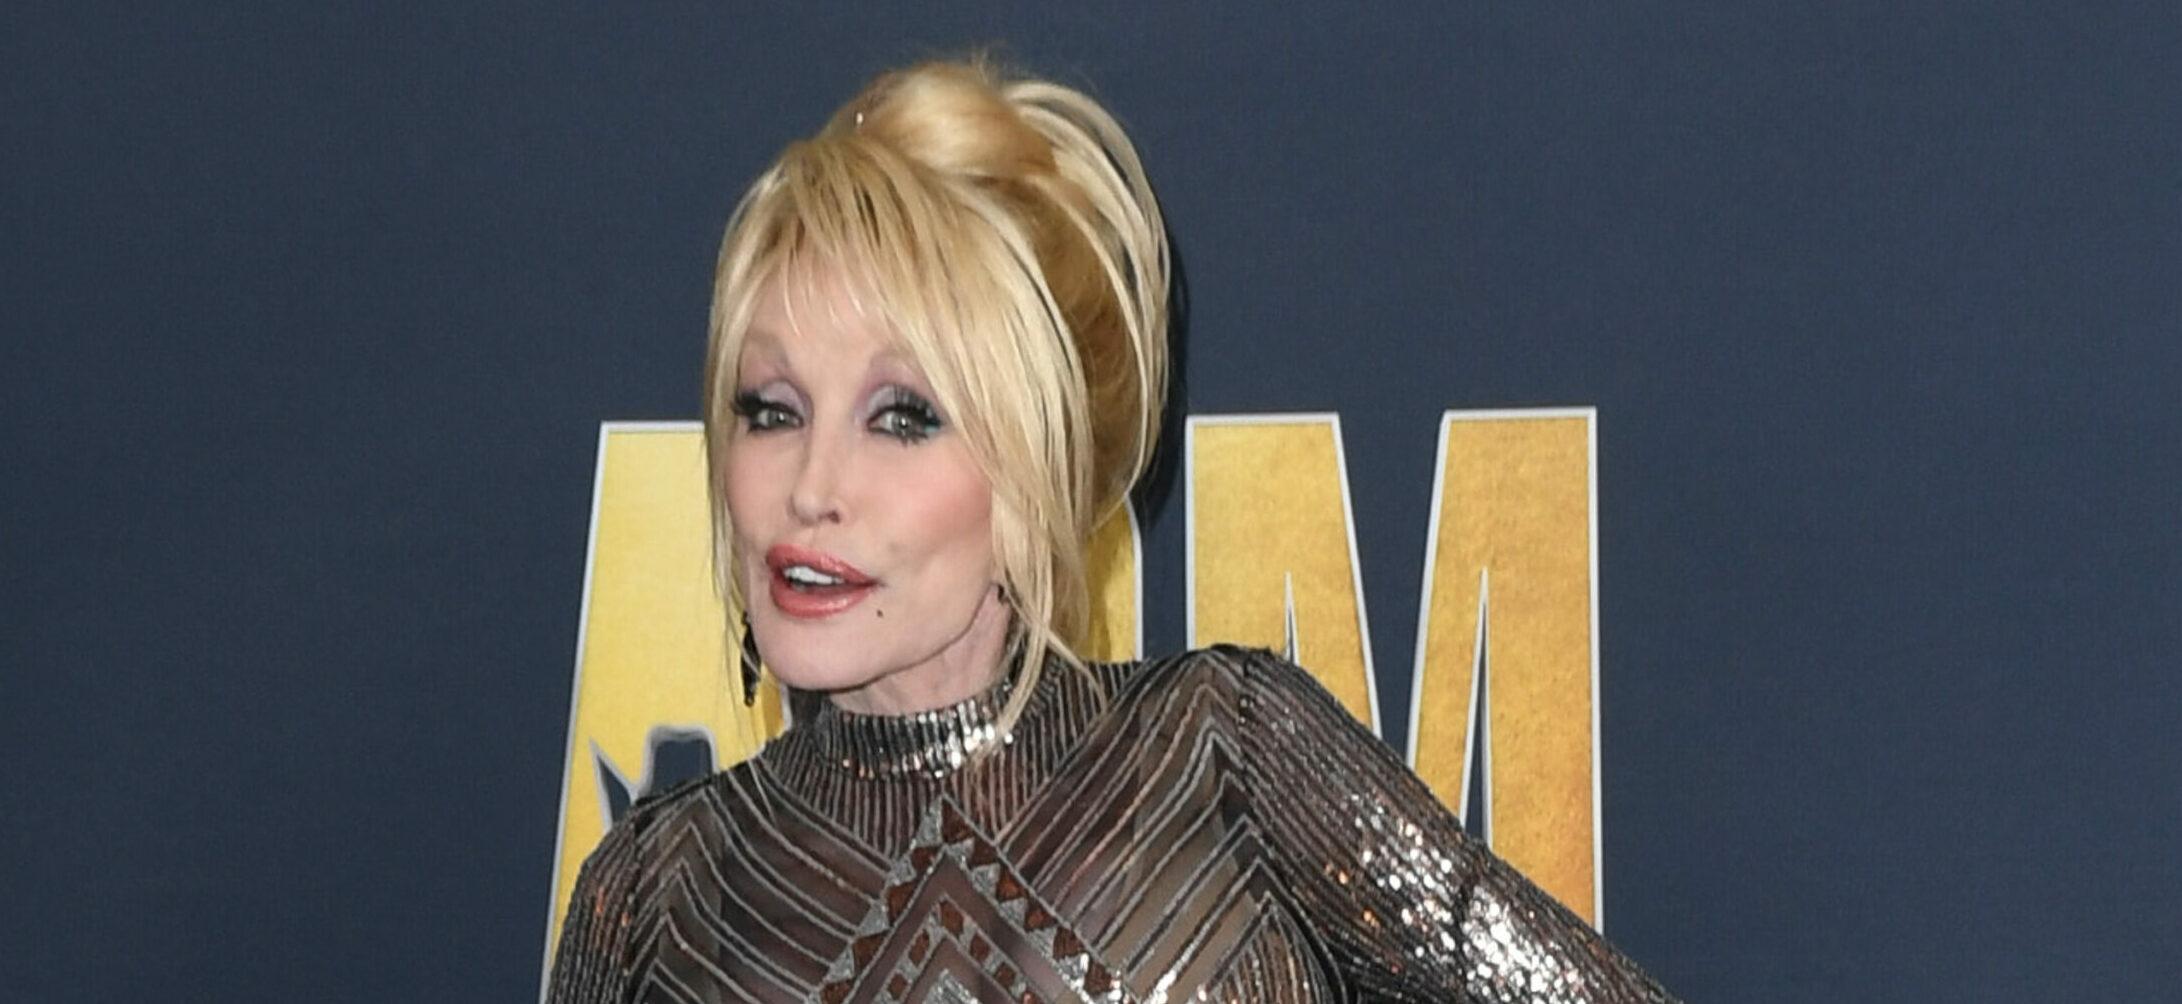 Dolly Parton Celebrates 77th Birthday With New Inspirational Song, Check It Out!